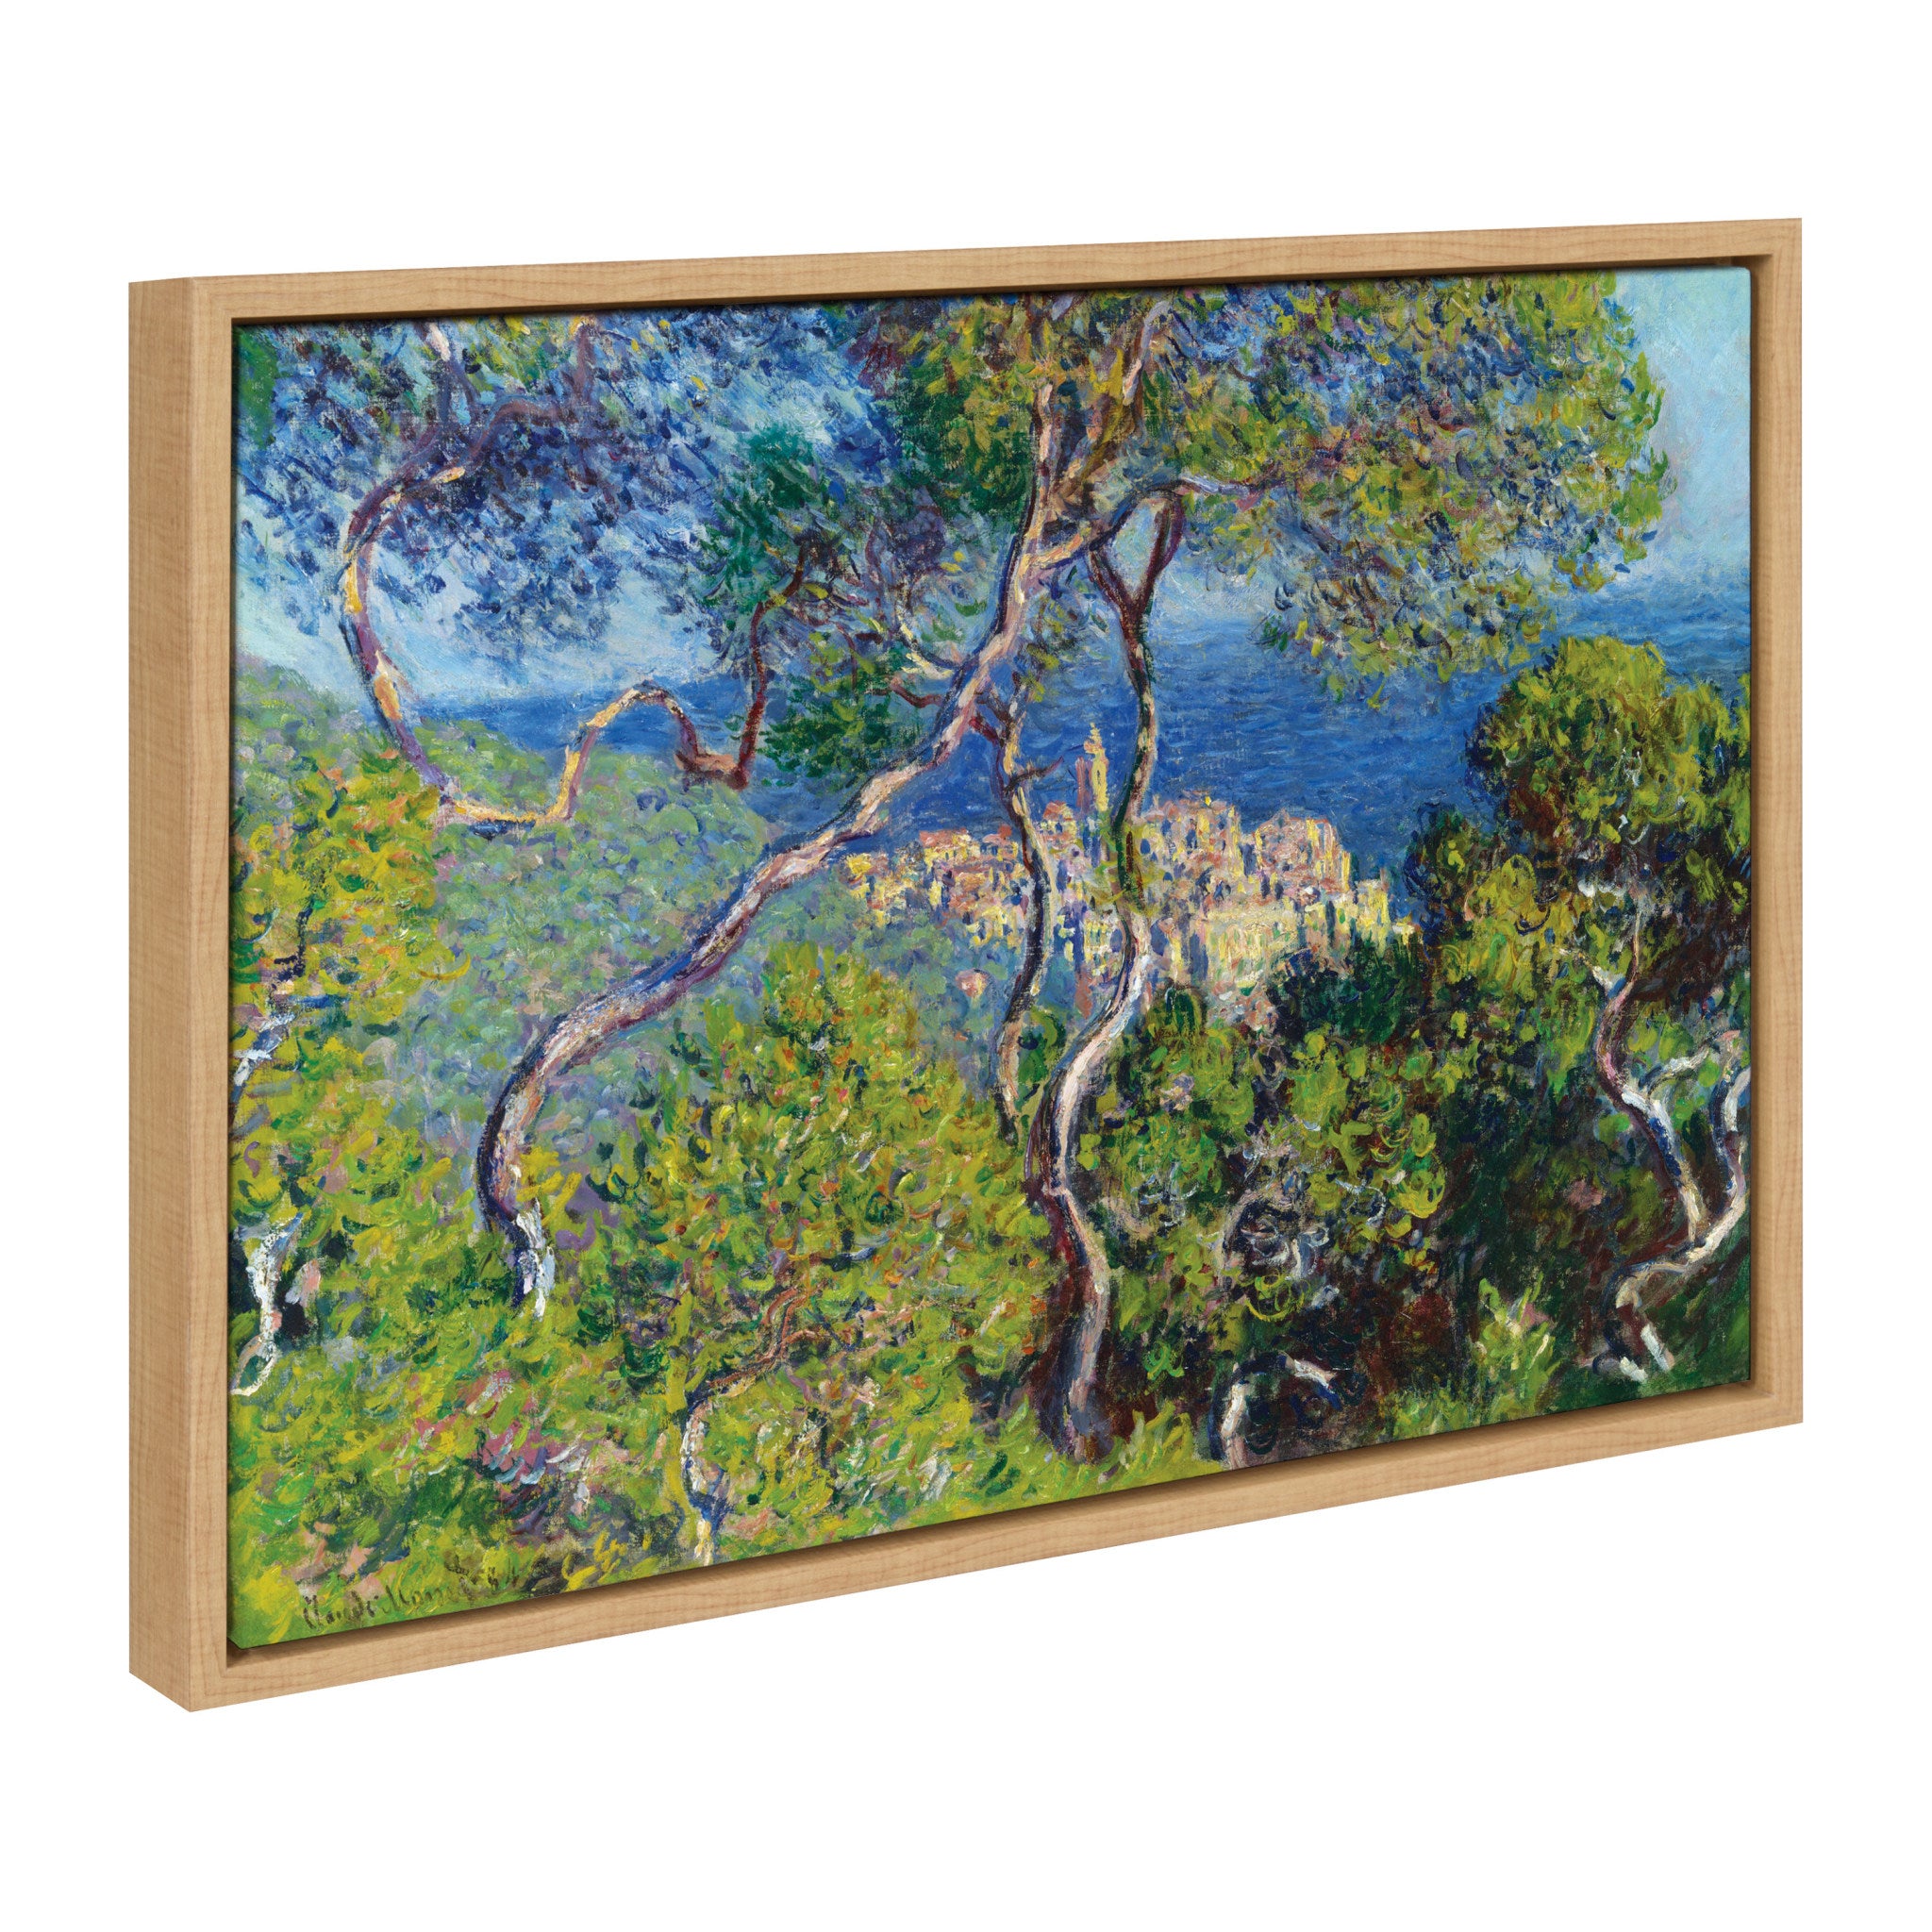 Sylvie Claude Monet Bordighera 1884 Framed Canvas by The Art Institute of Chicago